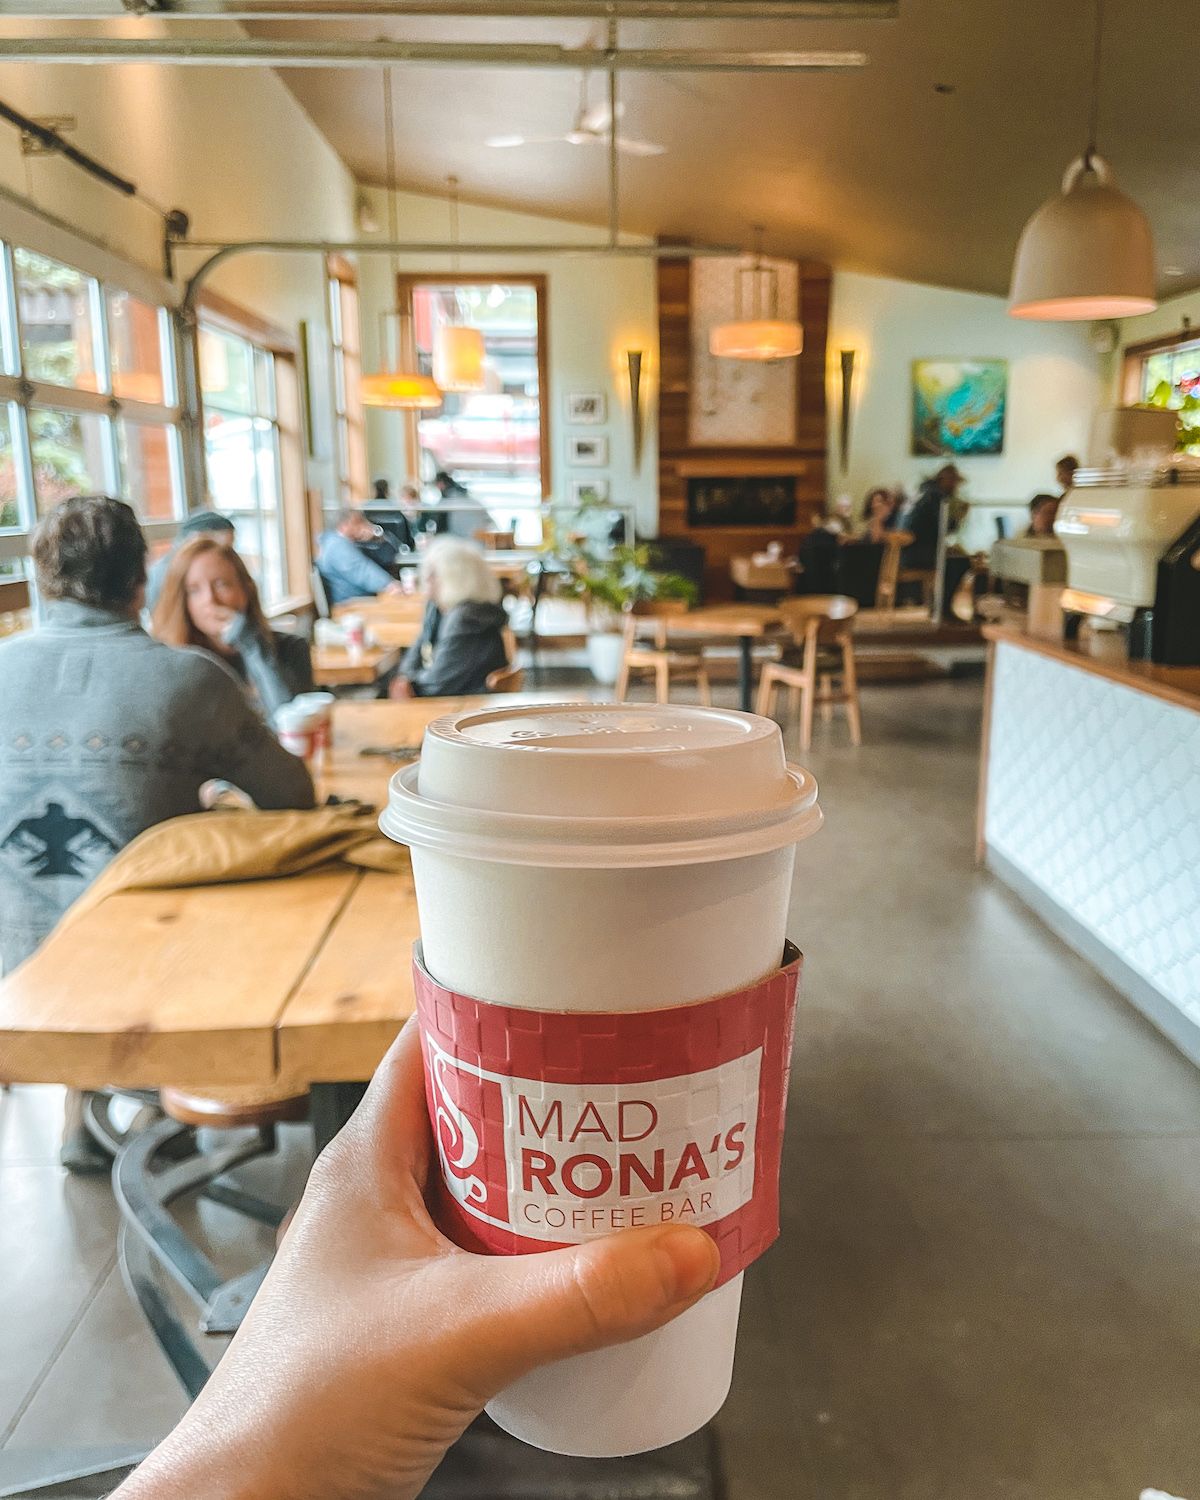 Coffee being held by hand with Mad Rona's interior in background